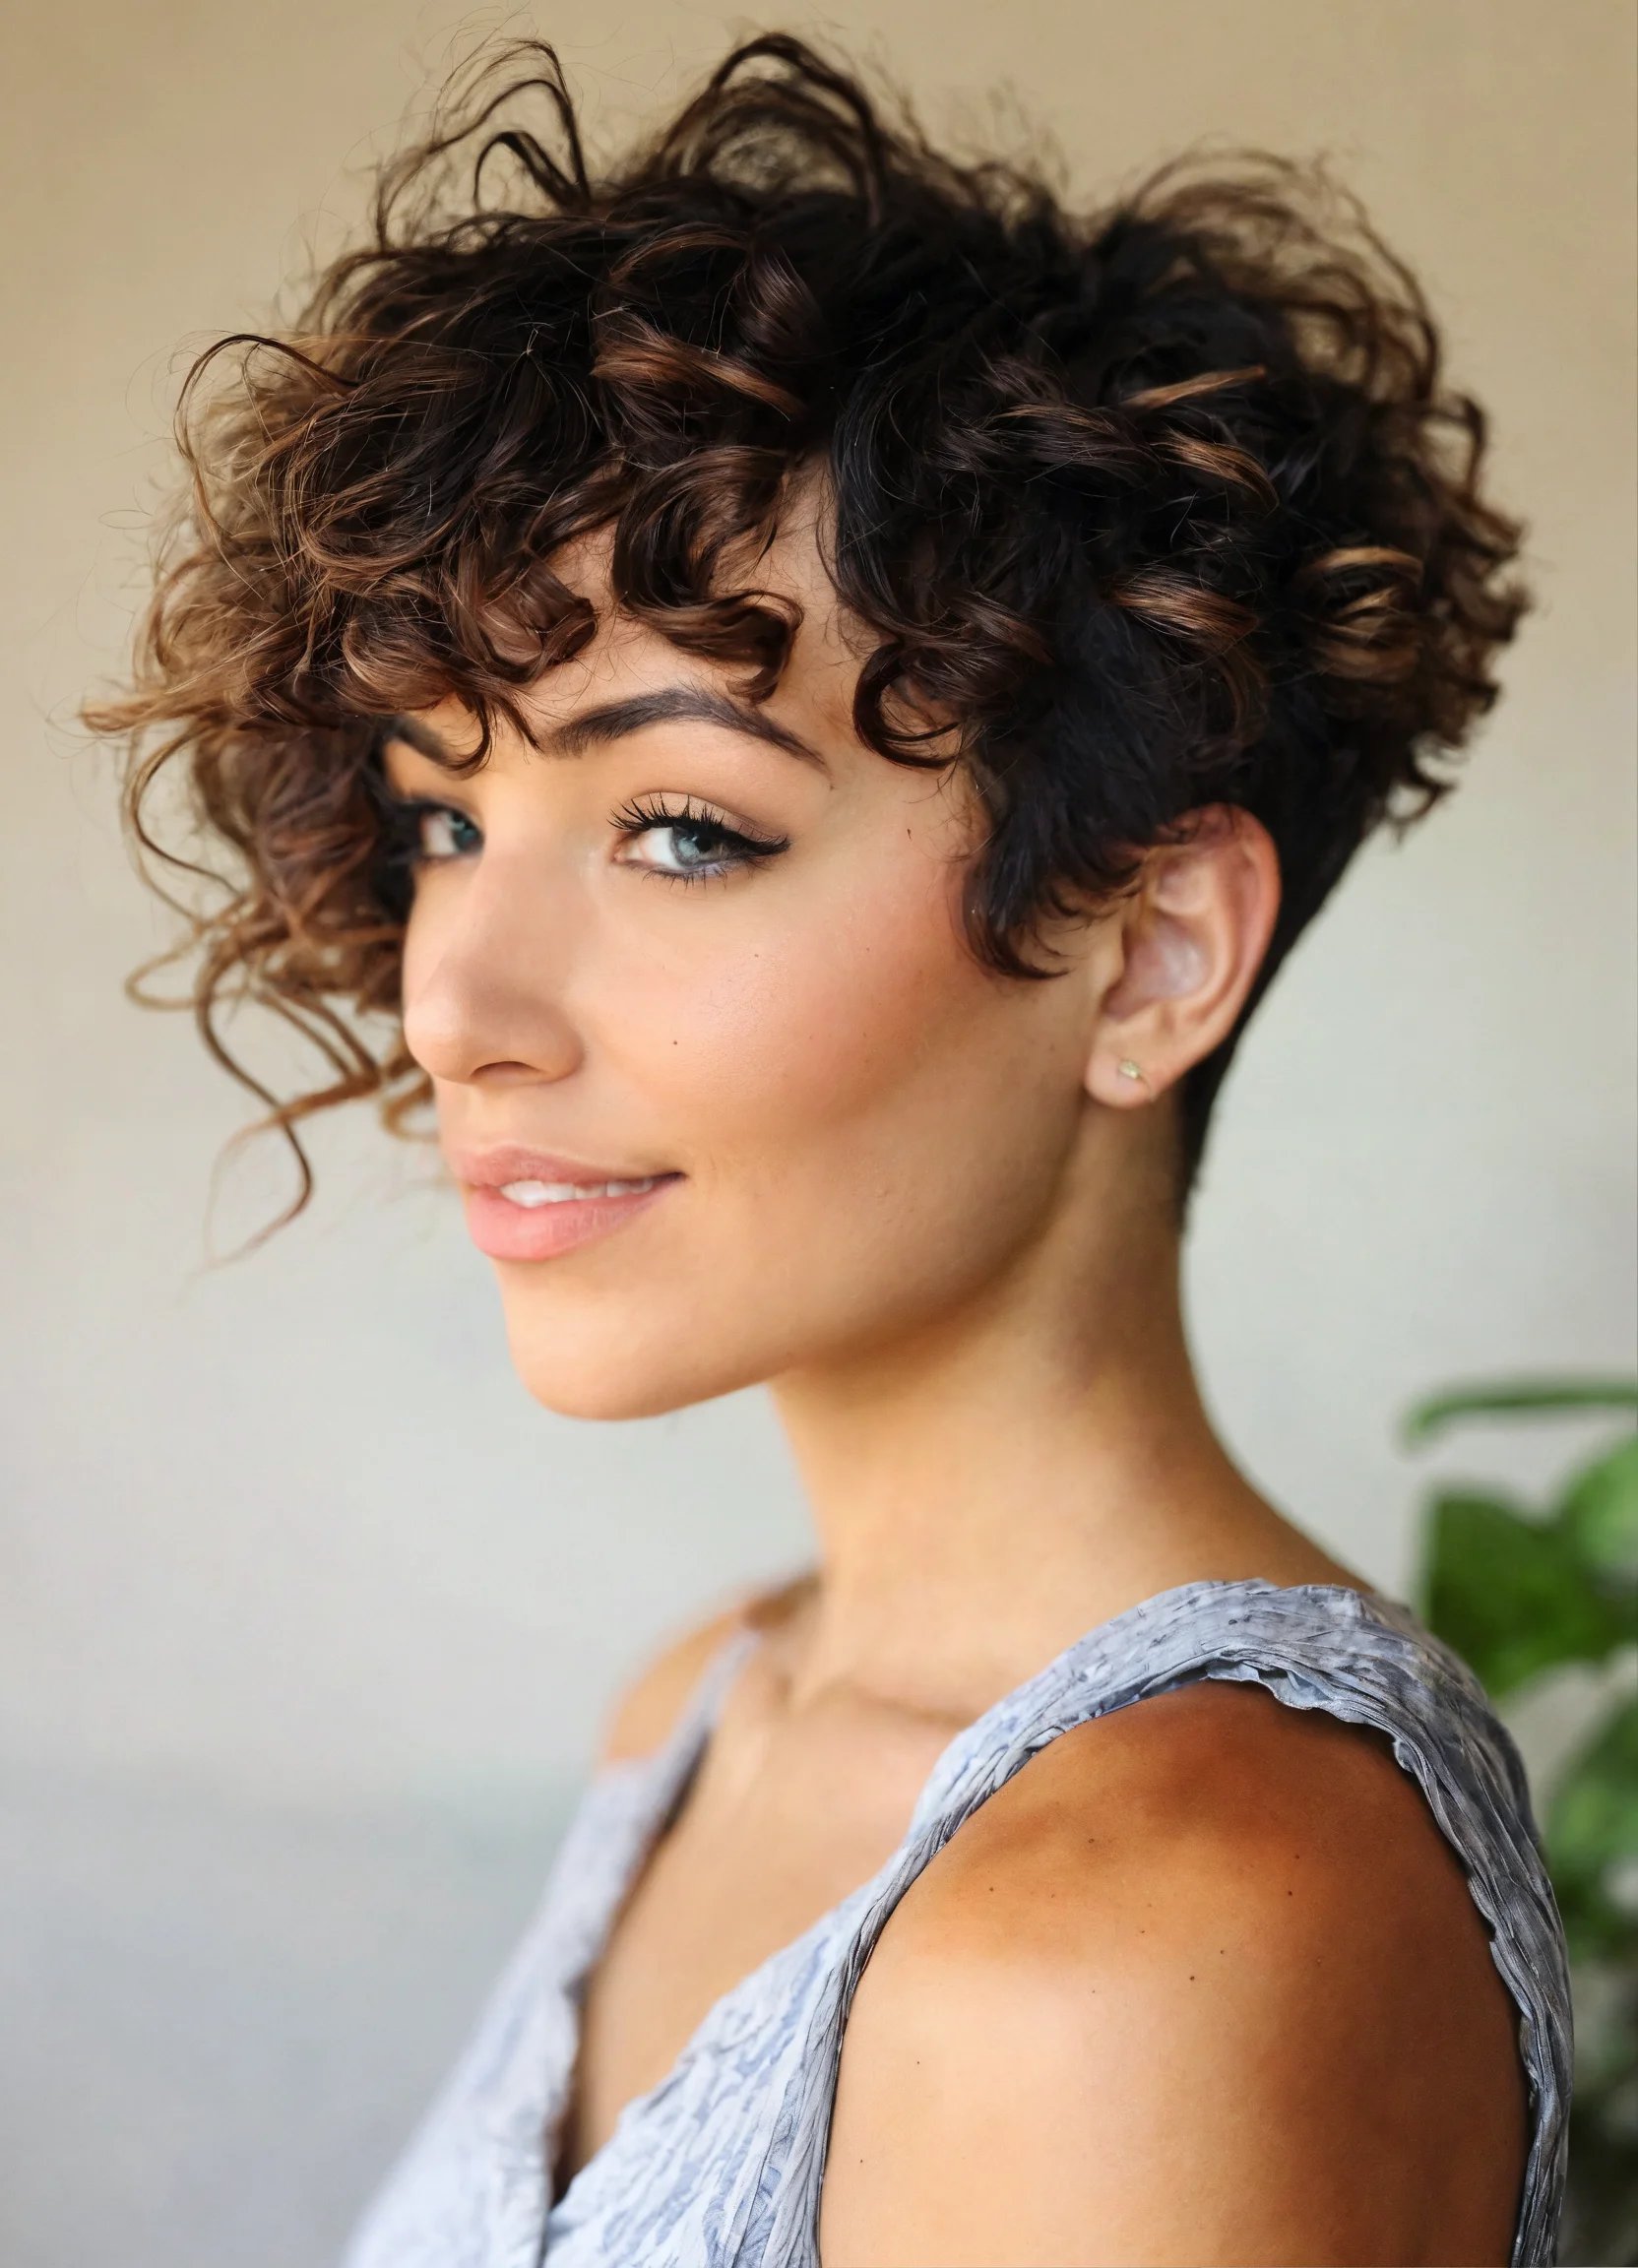 24 ideas for Summer Curls Hairstyles